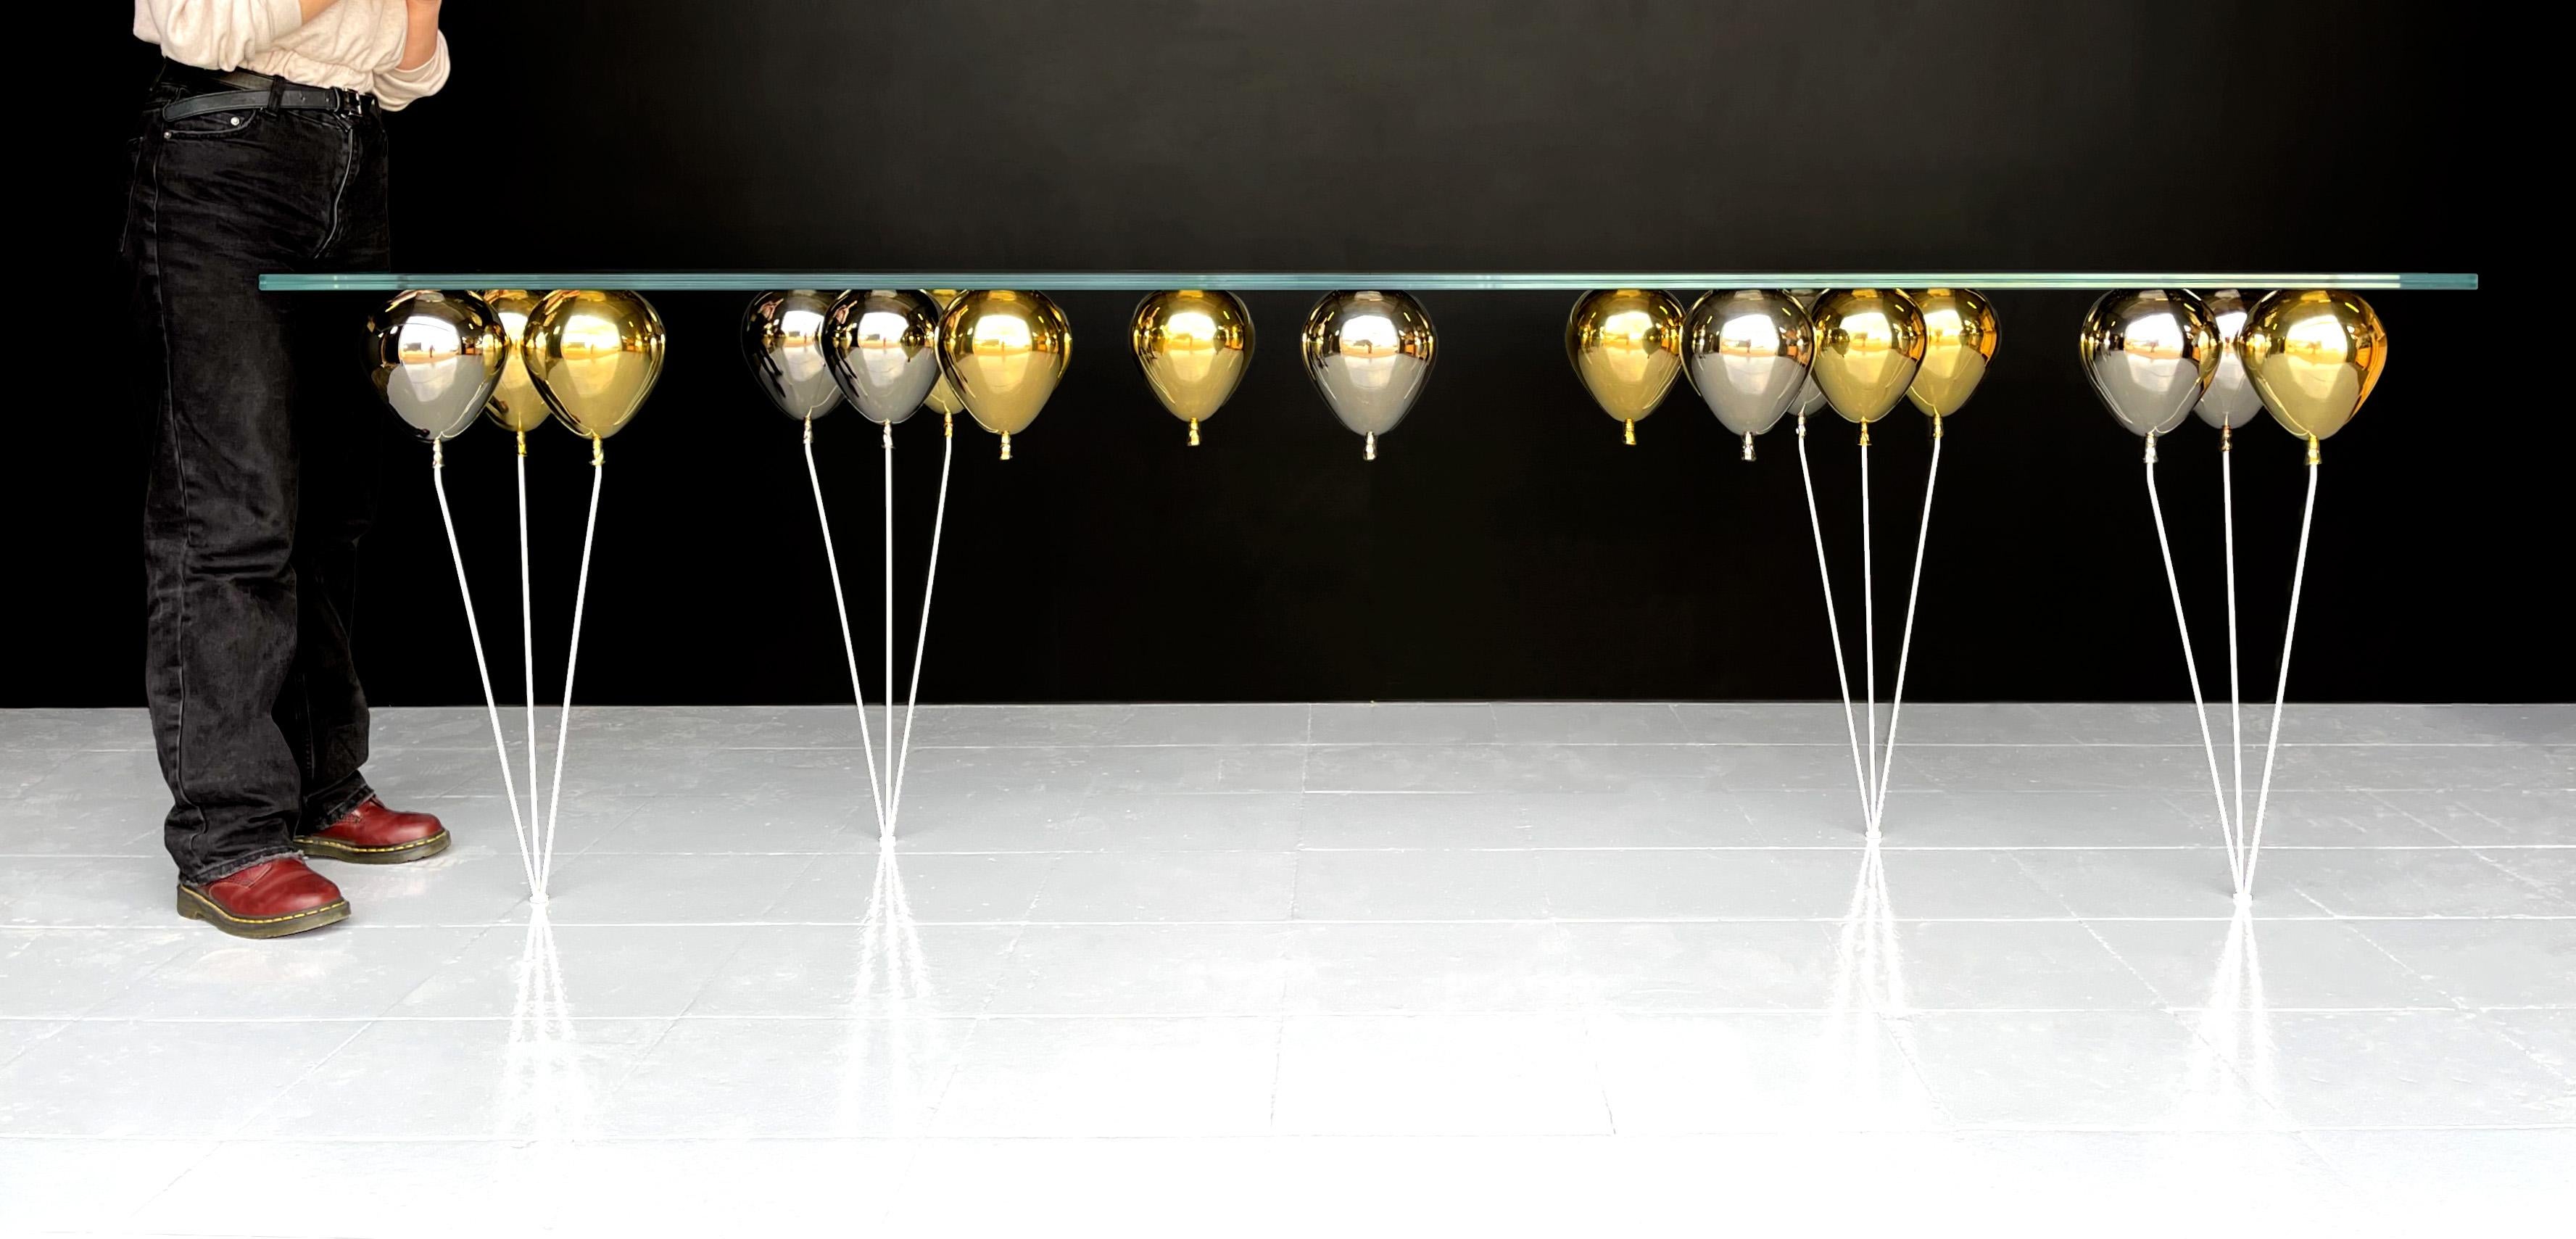 Occupying the liminal space between art and functional furniture design.

The UP Balloon console table is a playful trompe l’oeil furniture piece. A series of shimmering, polished metal balloons combine together to impress the illusion of a